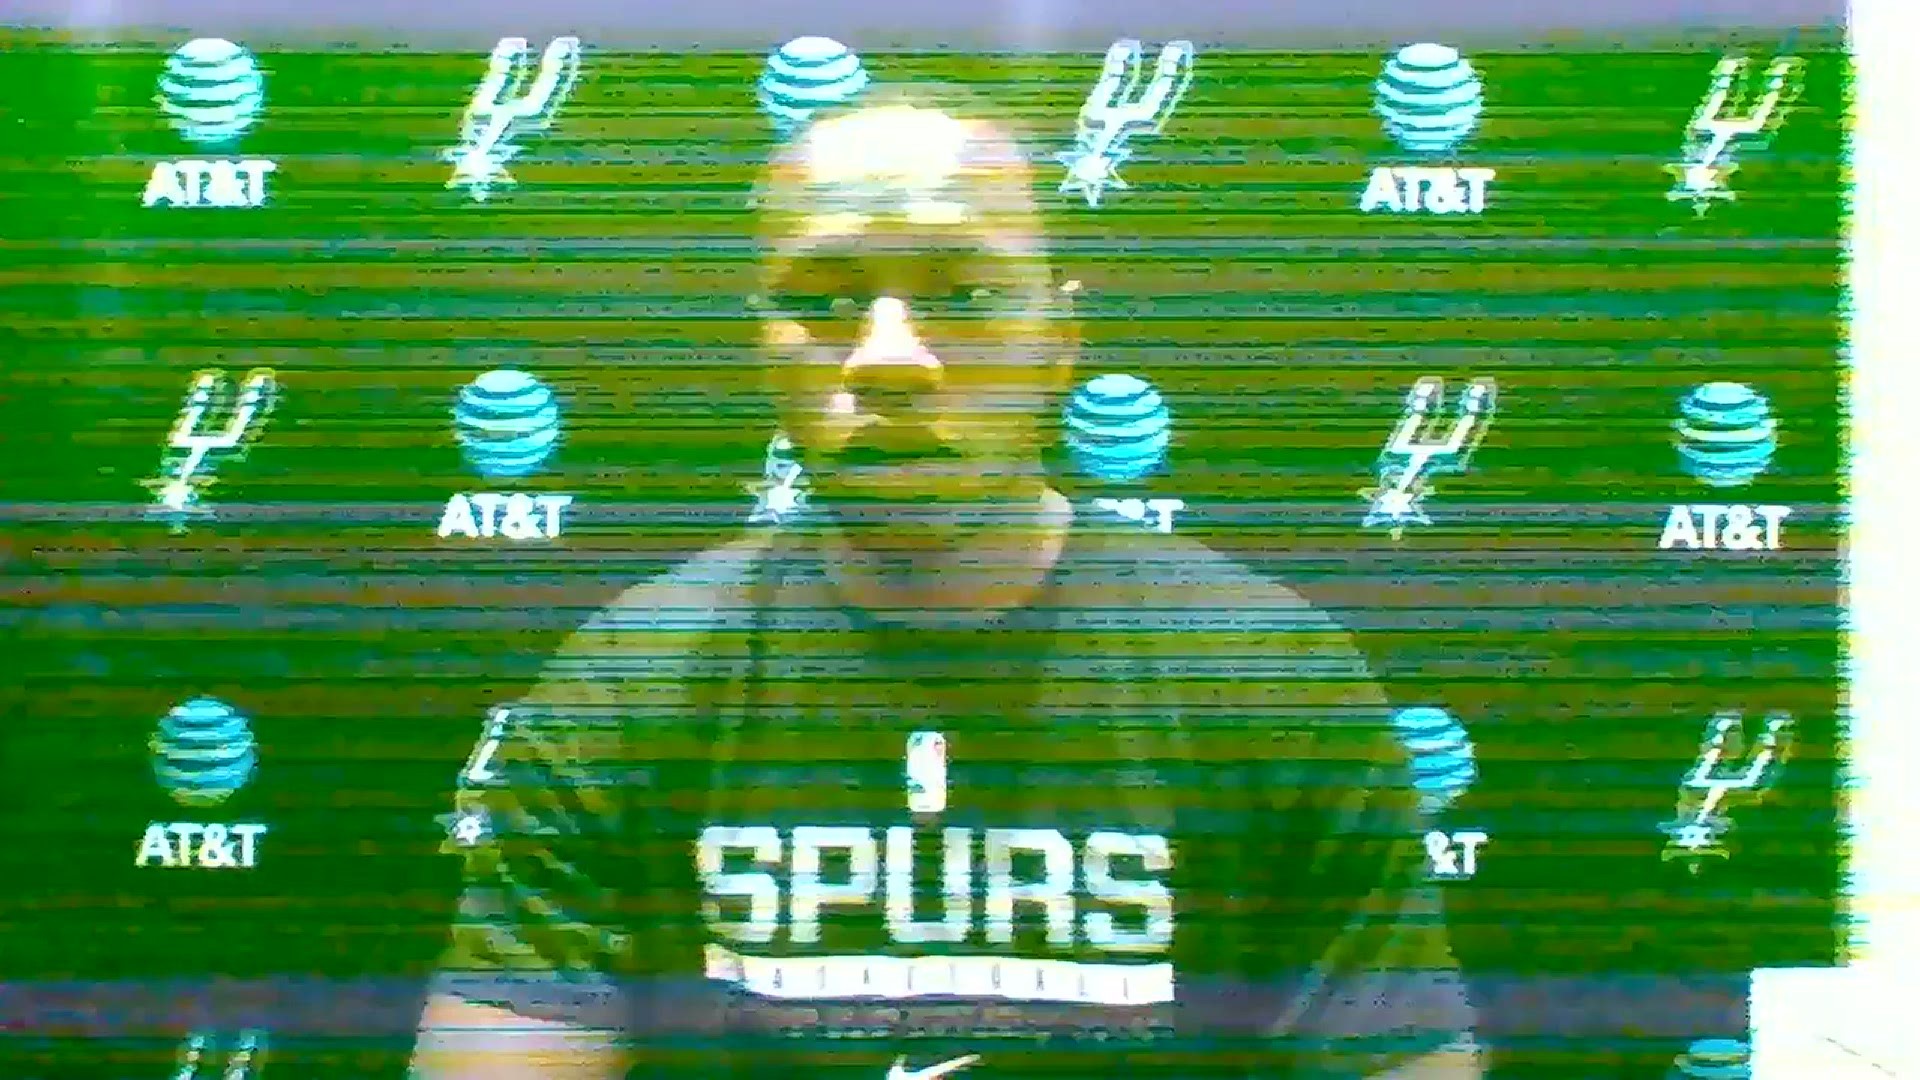 Dieng said he felt like it was college recruiting, but he likes the Spurs and the way they play, and that's why he's here.